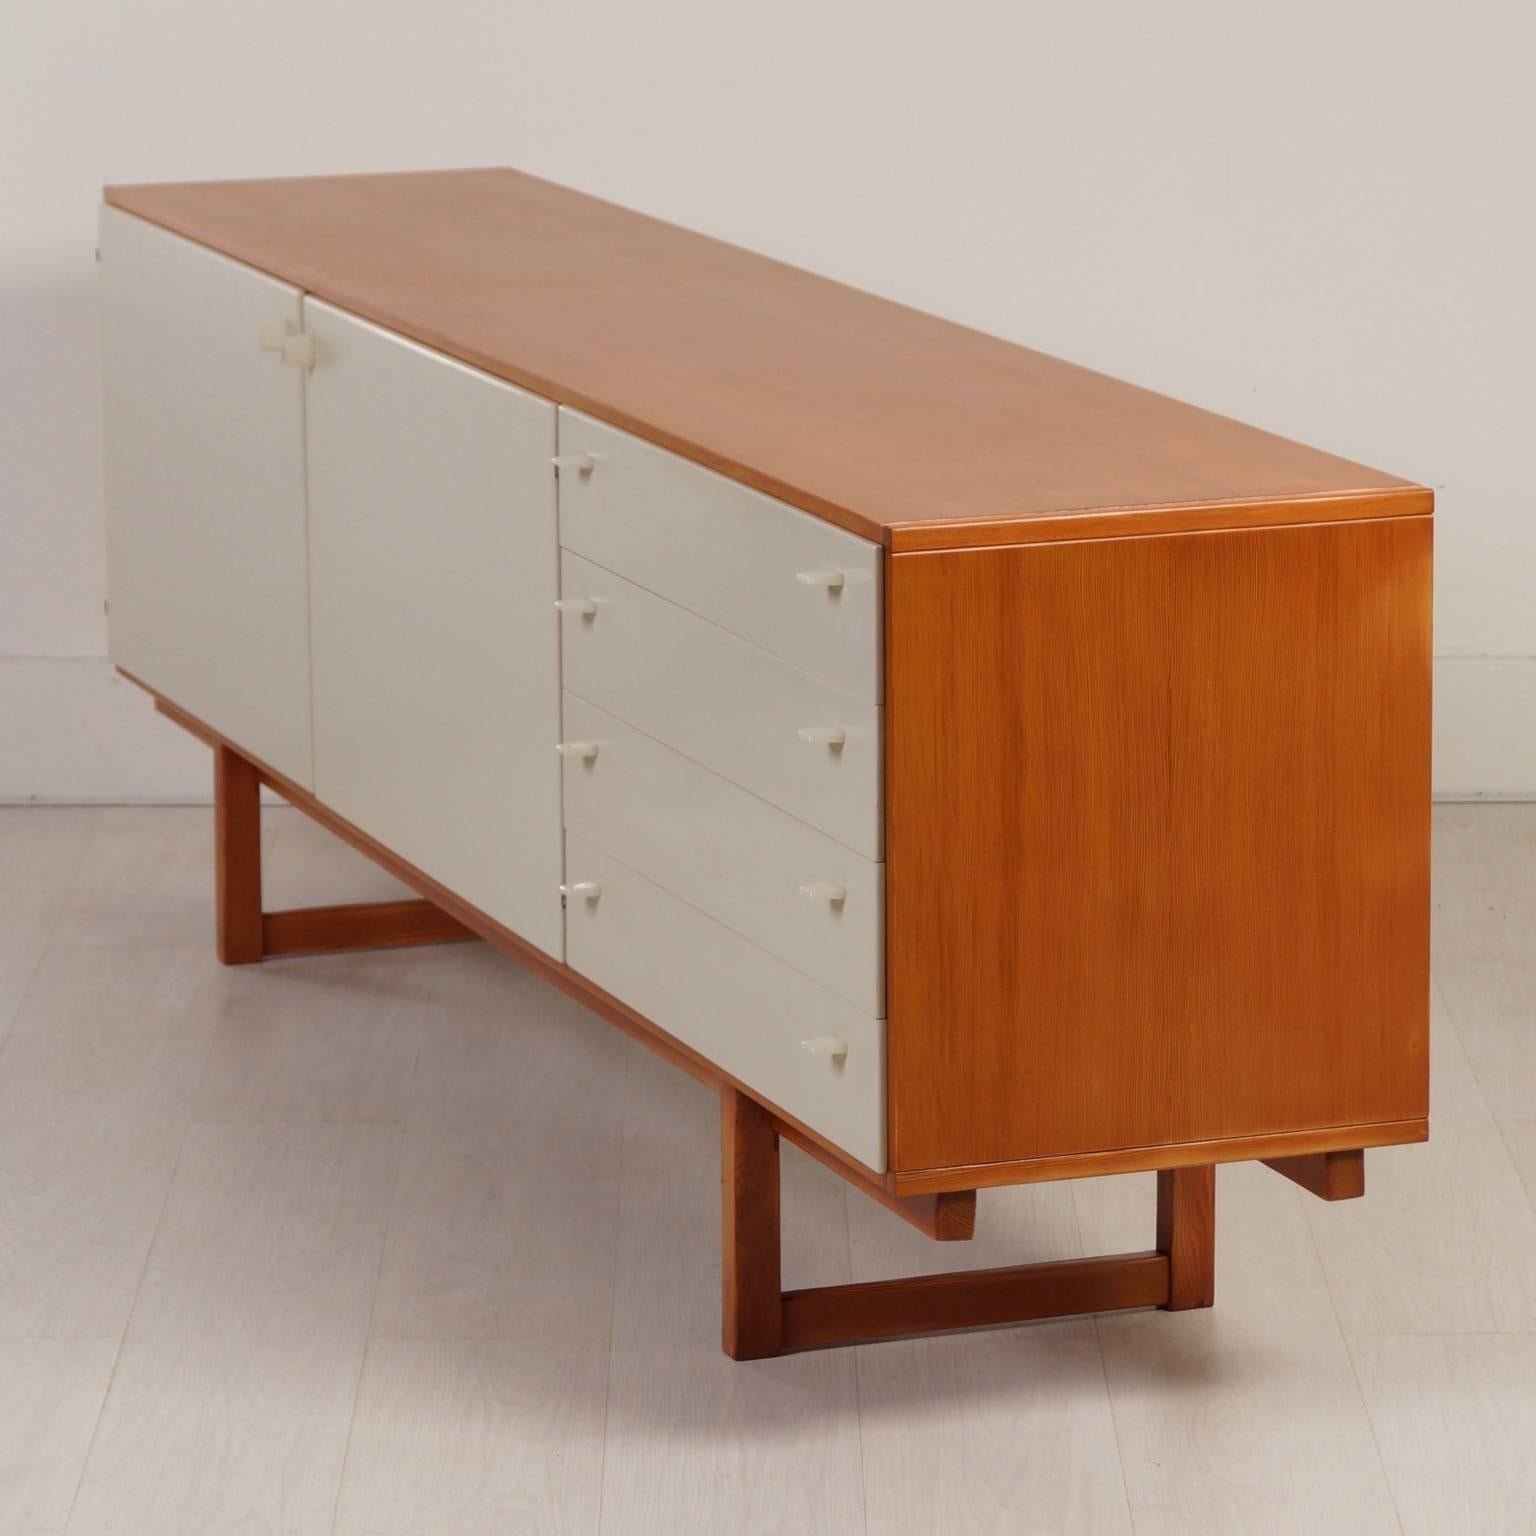 Oregon pinewood sideboard by Cees Braakman for Pastoe, circa 1970. Oregon pinewood comes from the Canadese- and US west coast and was not often used by Pastoe. The Oregon pine gives a nice contrast with the white doors and drawers. The inside of the